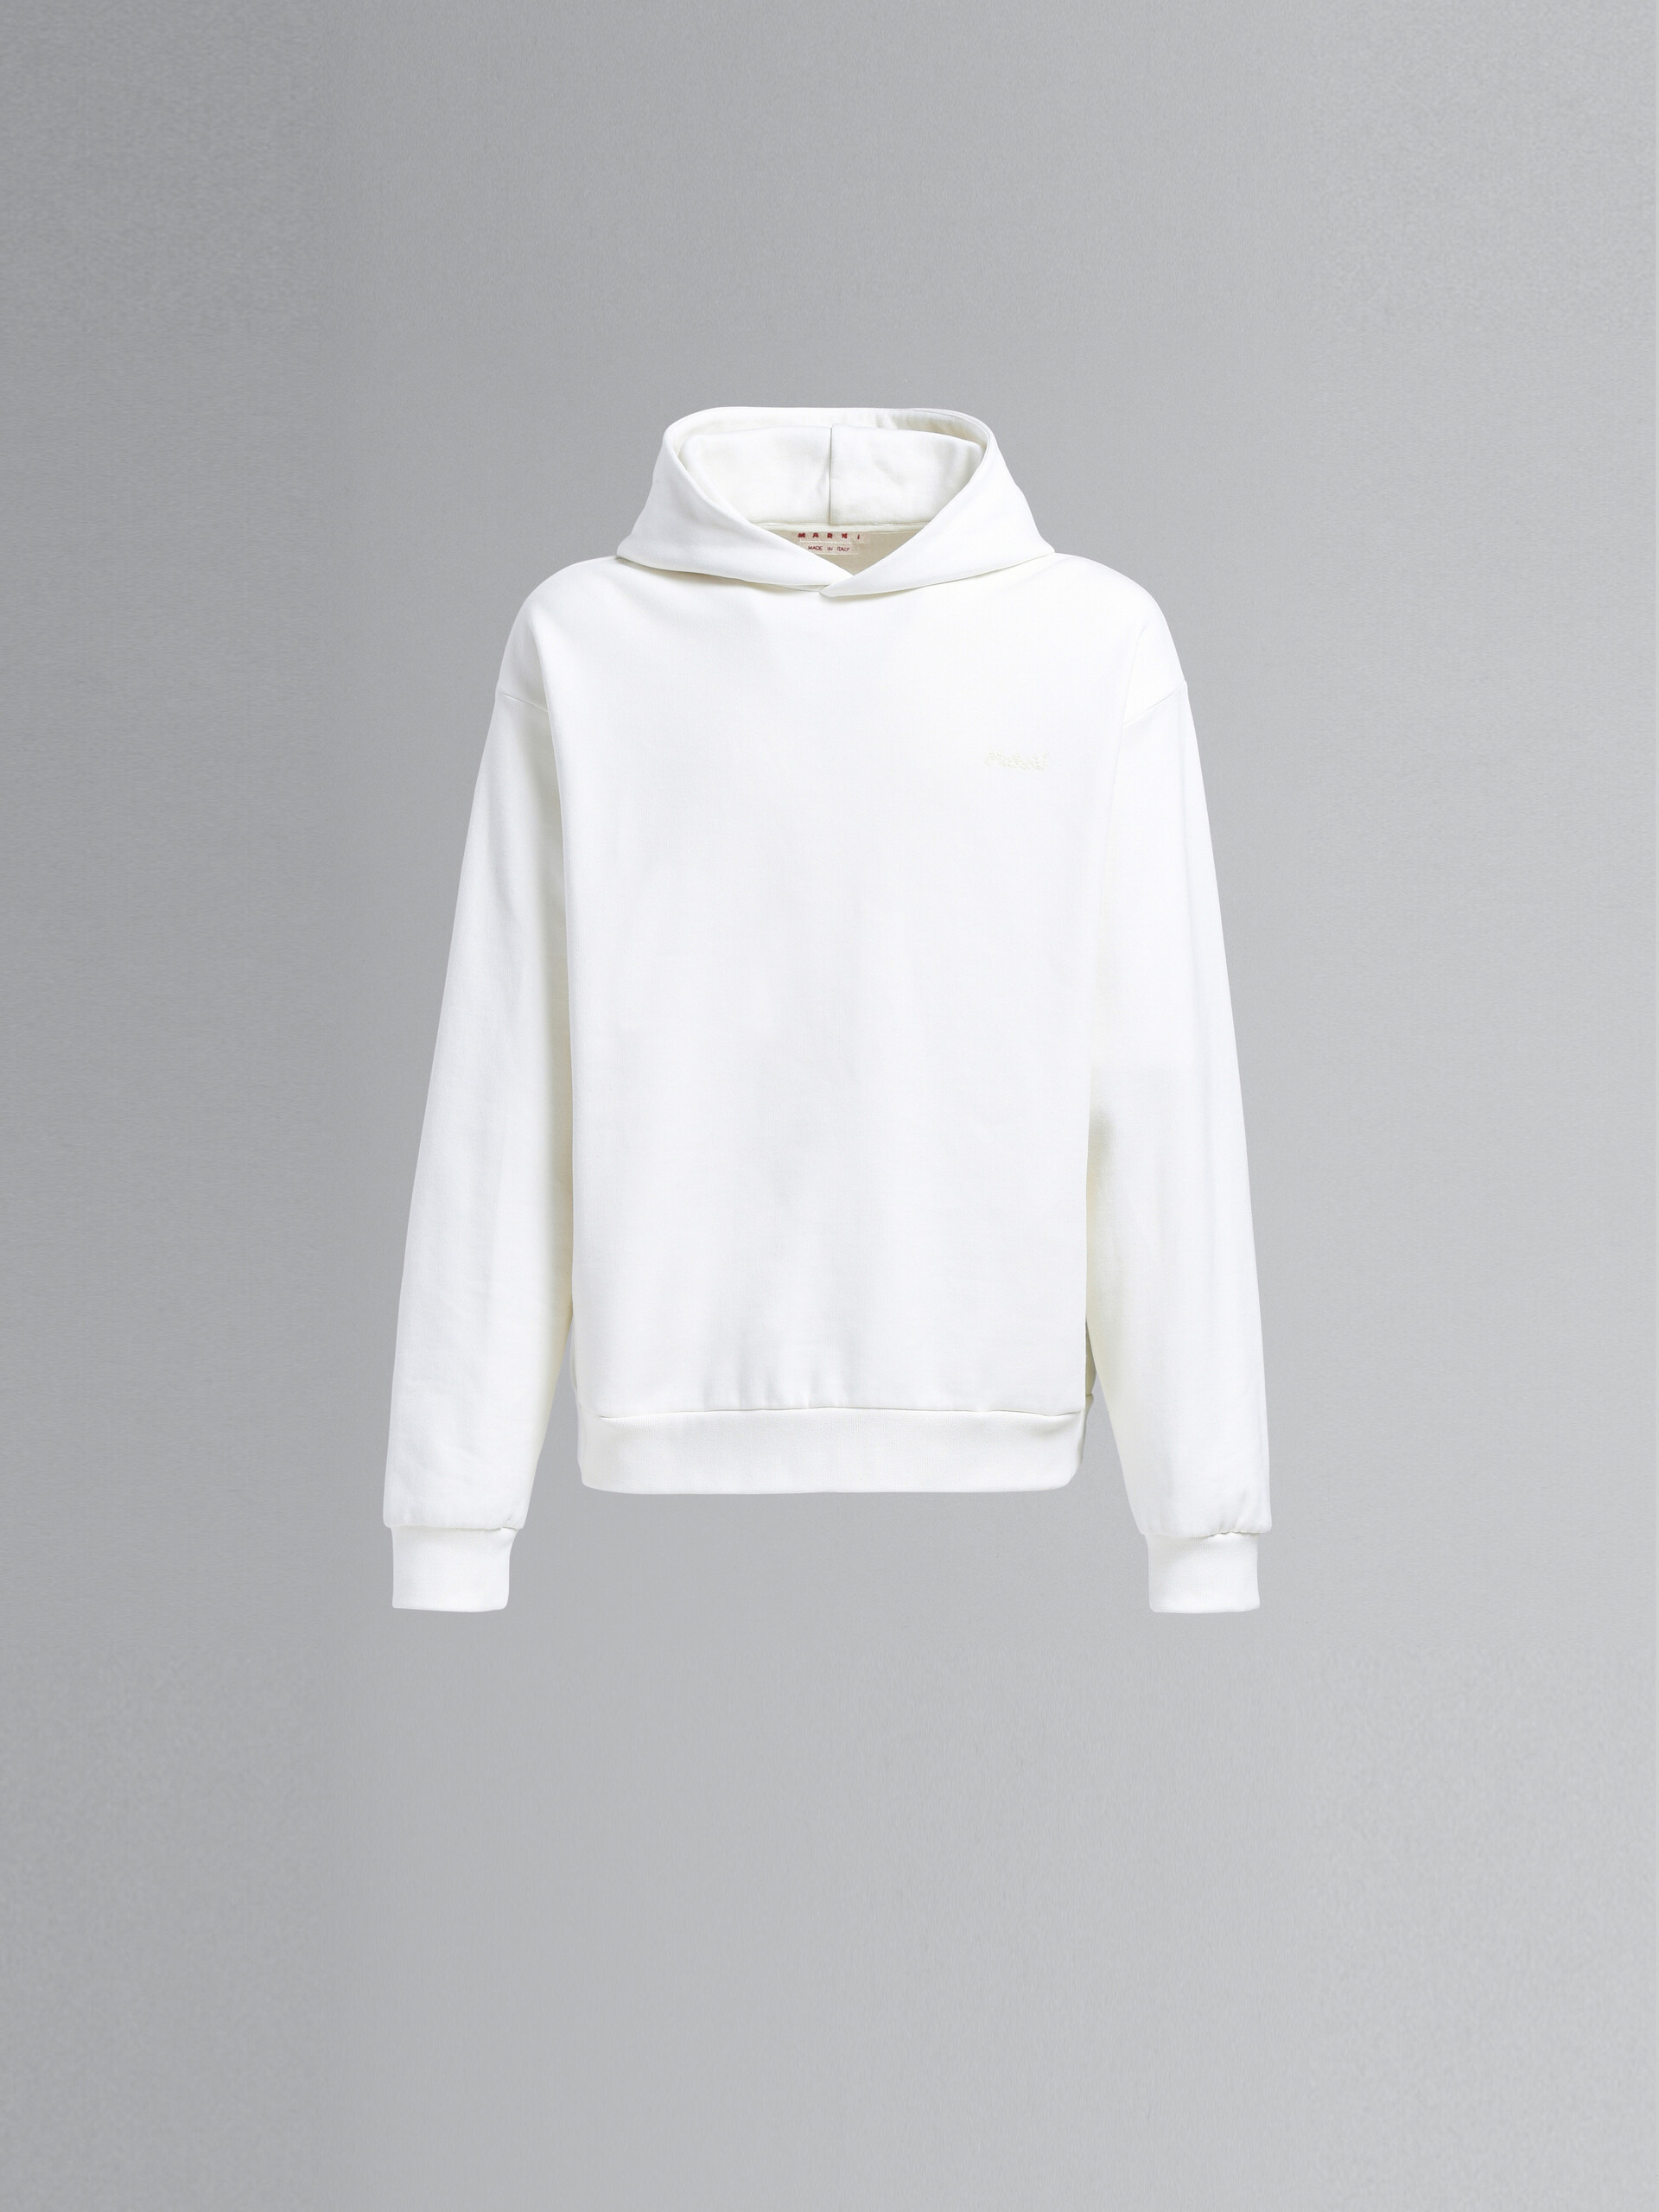 White hoodie with back print - Sweaters - Image 1